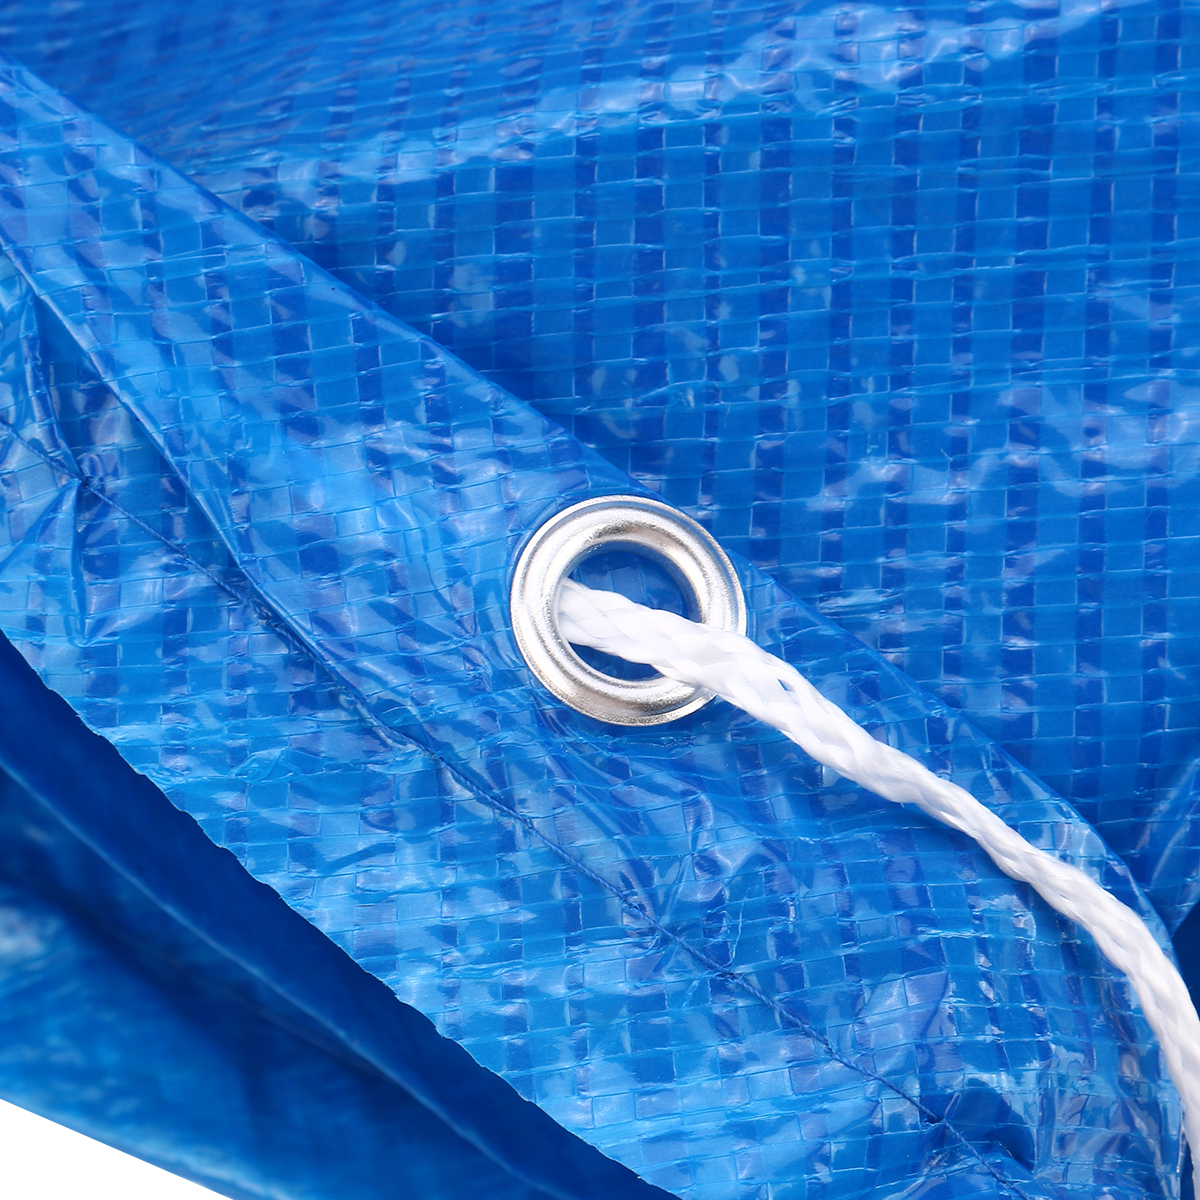 244305366cm-Round-Inflatable-Paddling-Swimming-Pool-Dust-Cover-Tarp-Rope-1712508-7